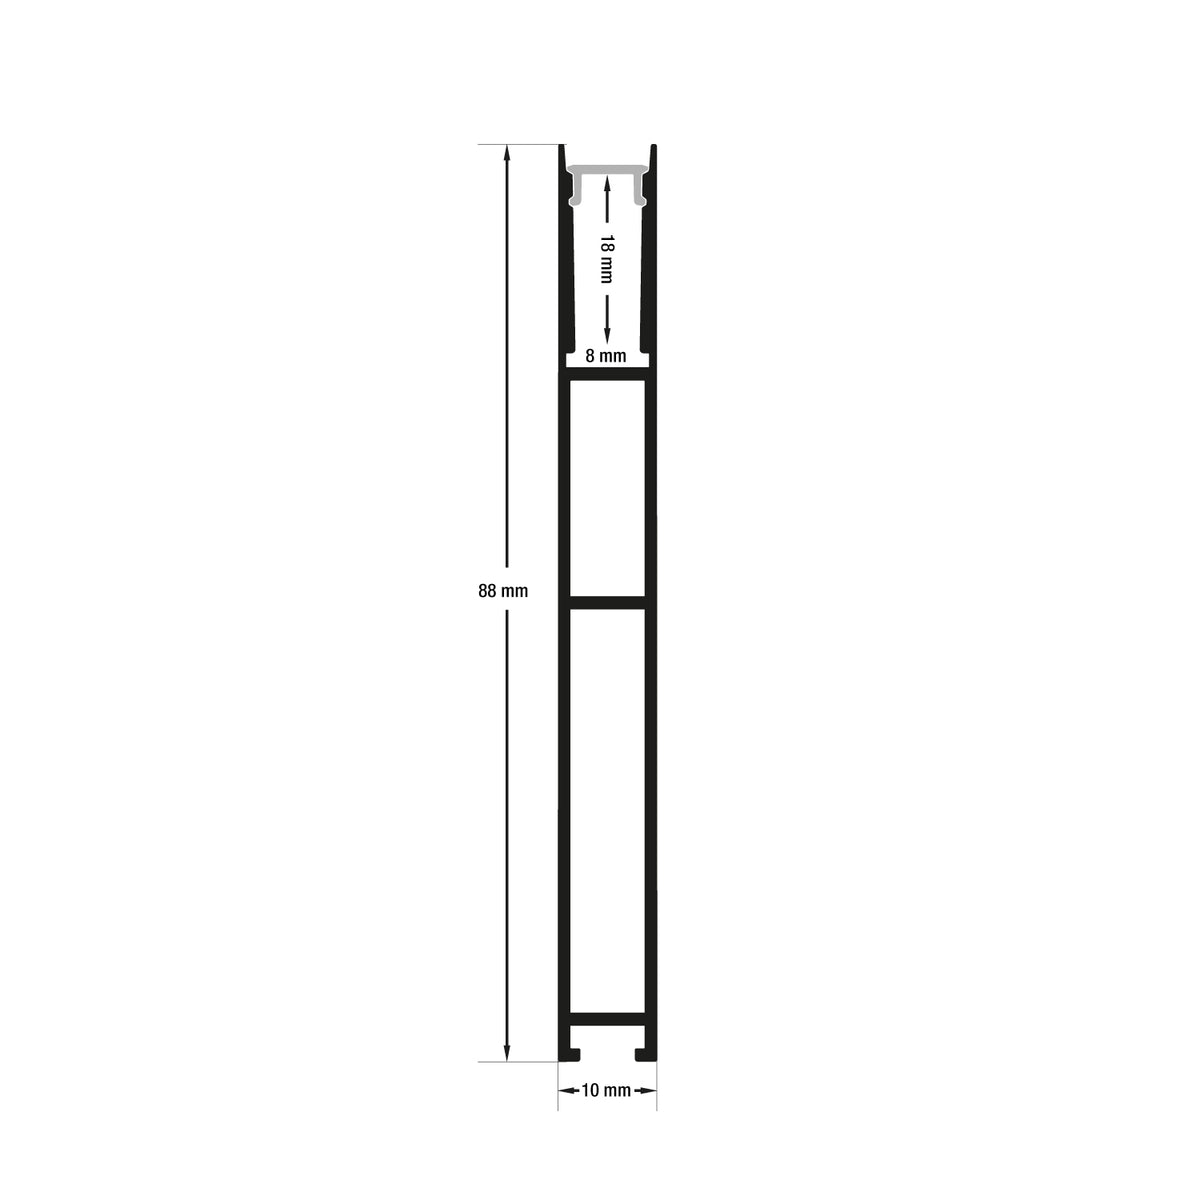 VBD-CH-H2 Narrow Black hanging Aluminum Channel 2.4Meters(94.4in) and 3Meters(118in), Veroboard